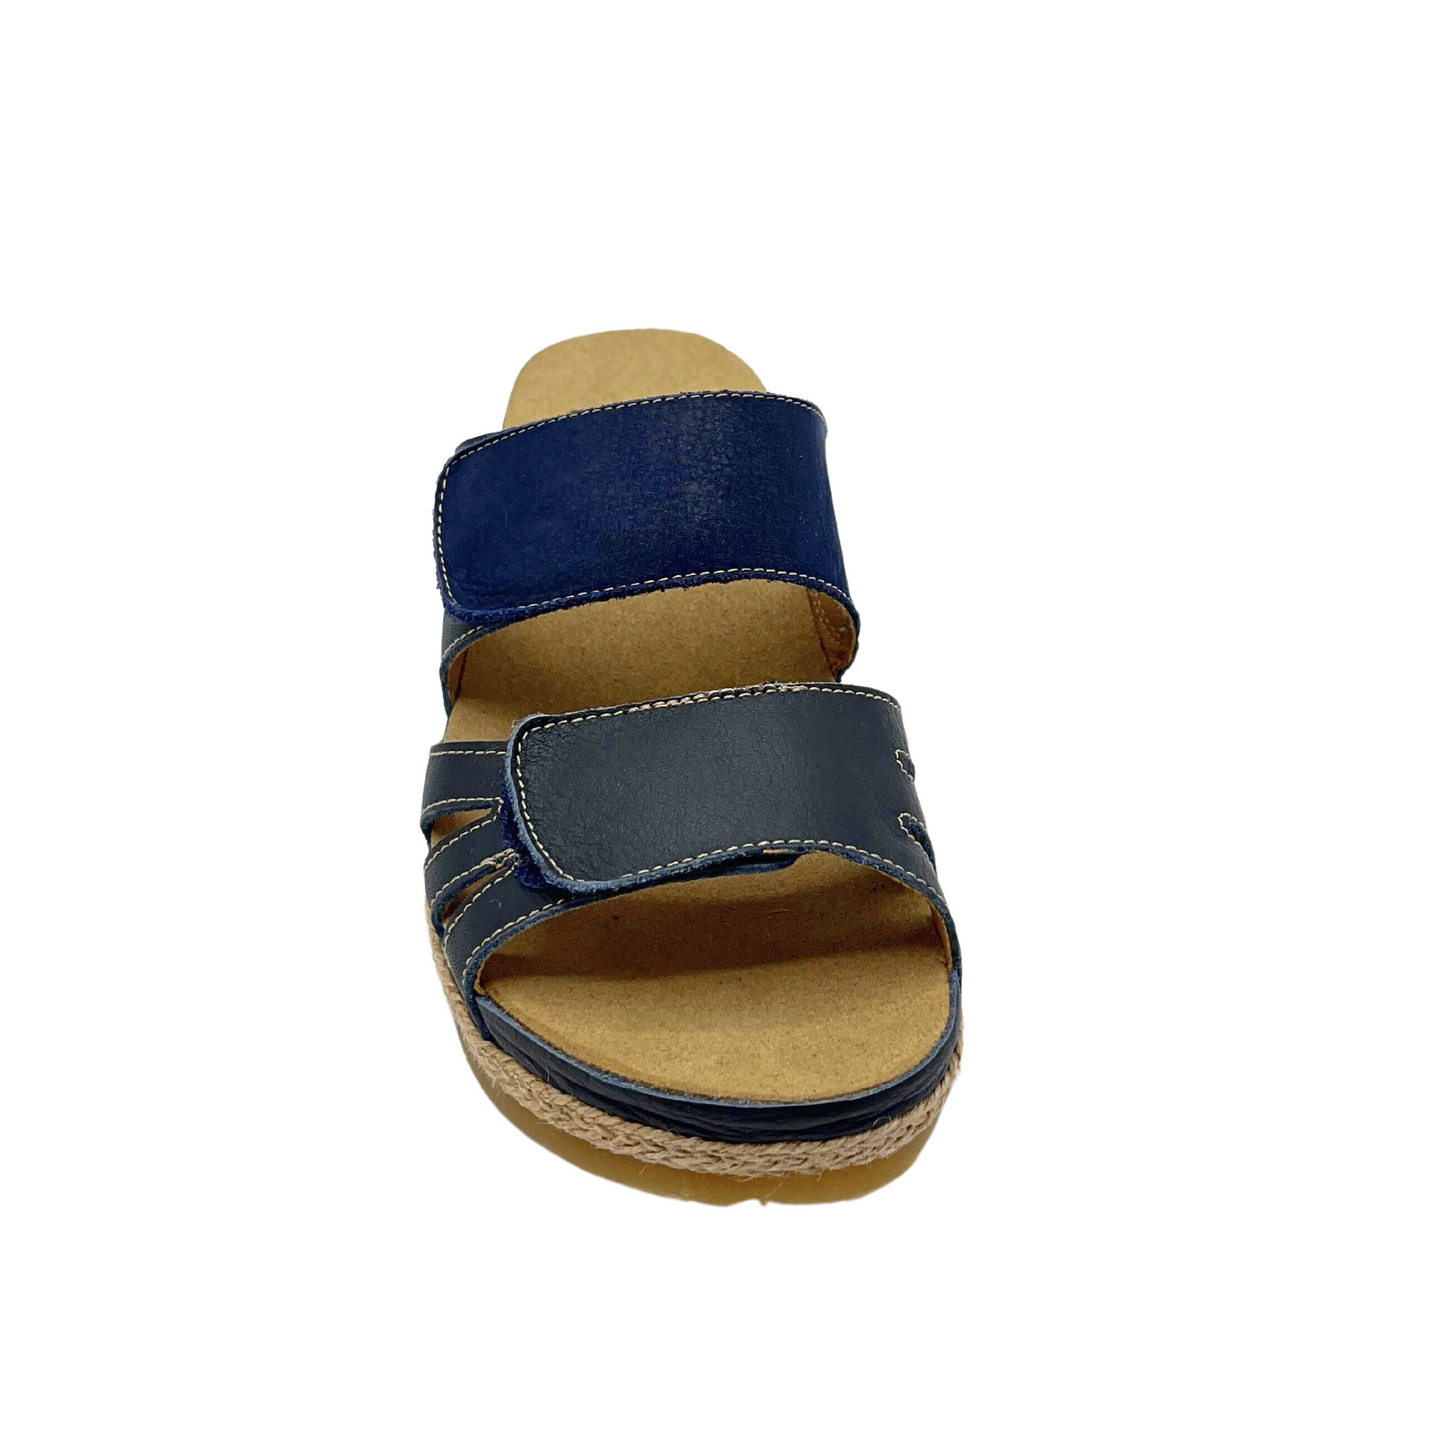 Front view of open back sandal in a navy color with white stitching detail.  Rubber outsole